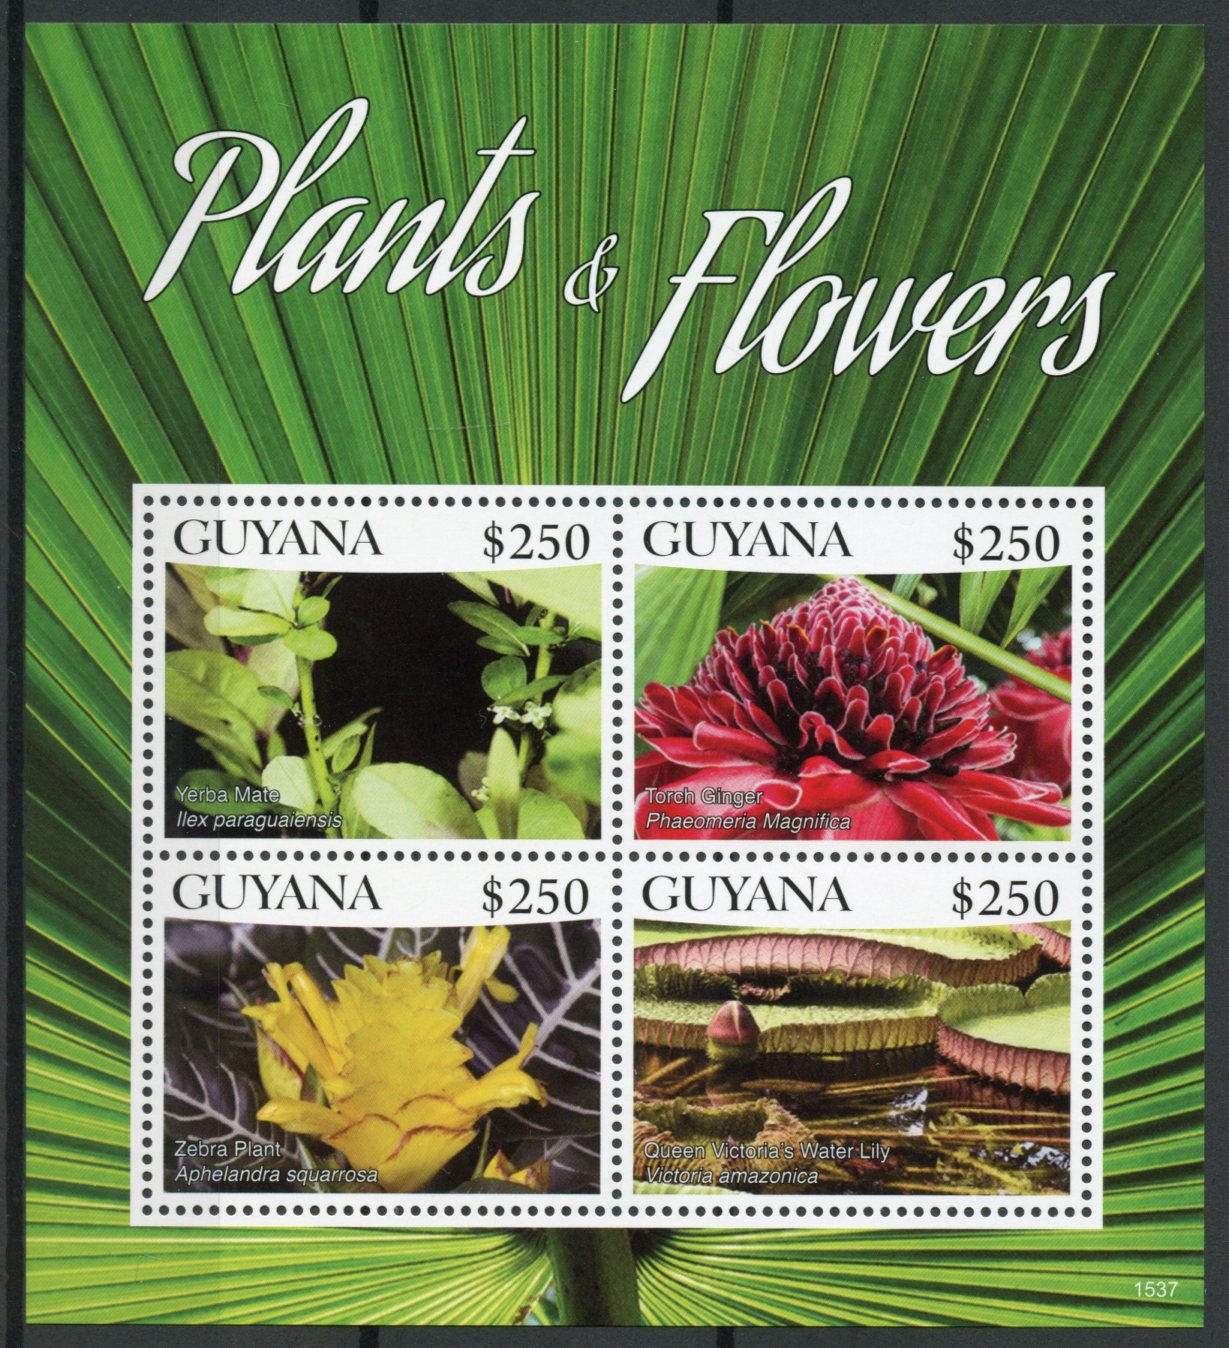 Guyana 2015 MNH Plants & Flowers 4v M/S I Yerba Mate Torch Ginger Nature Stamps